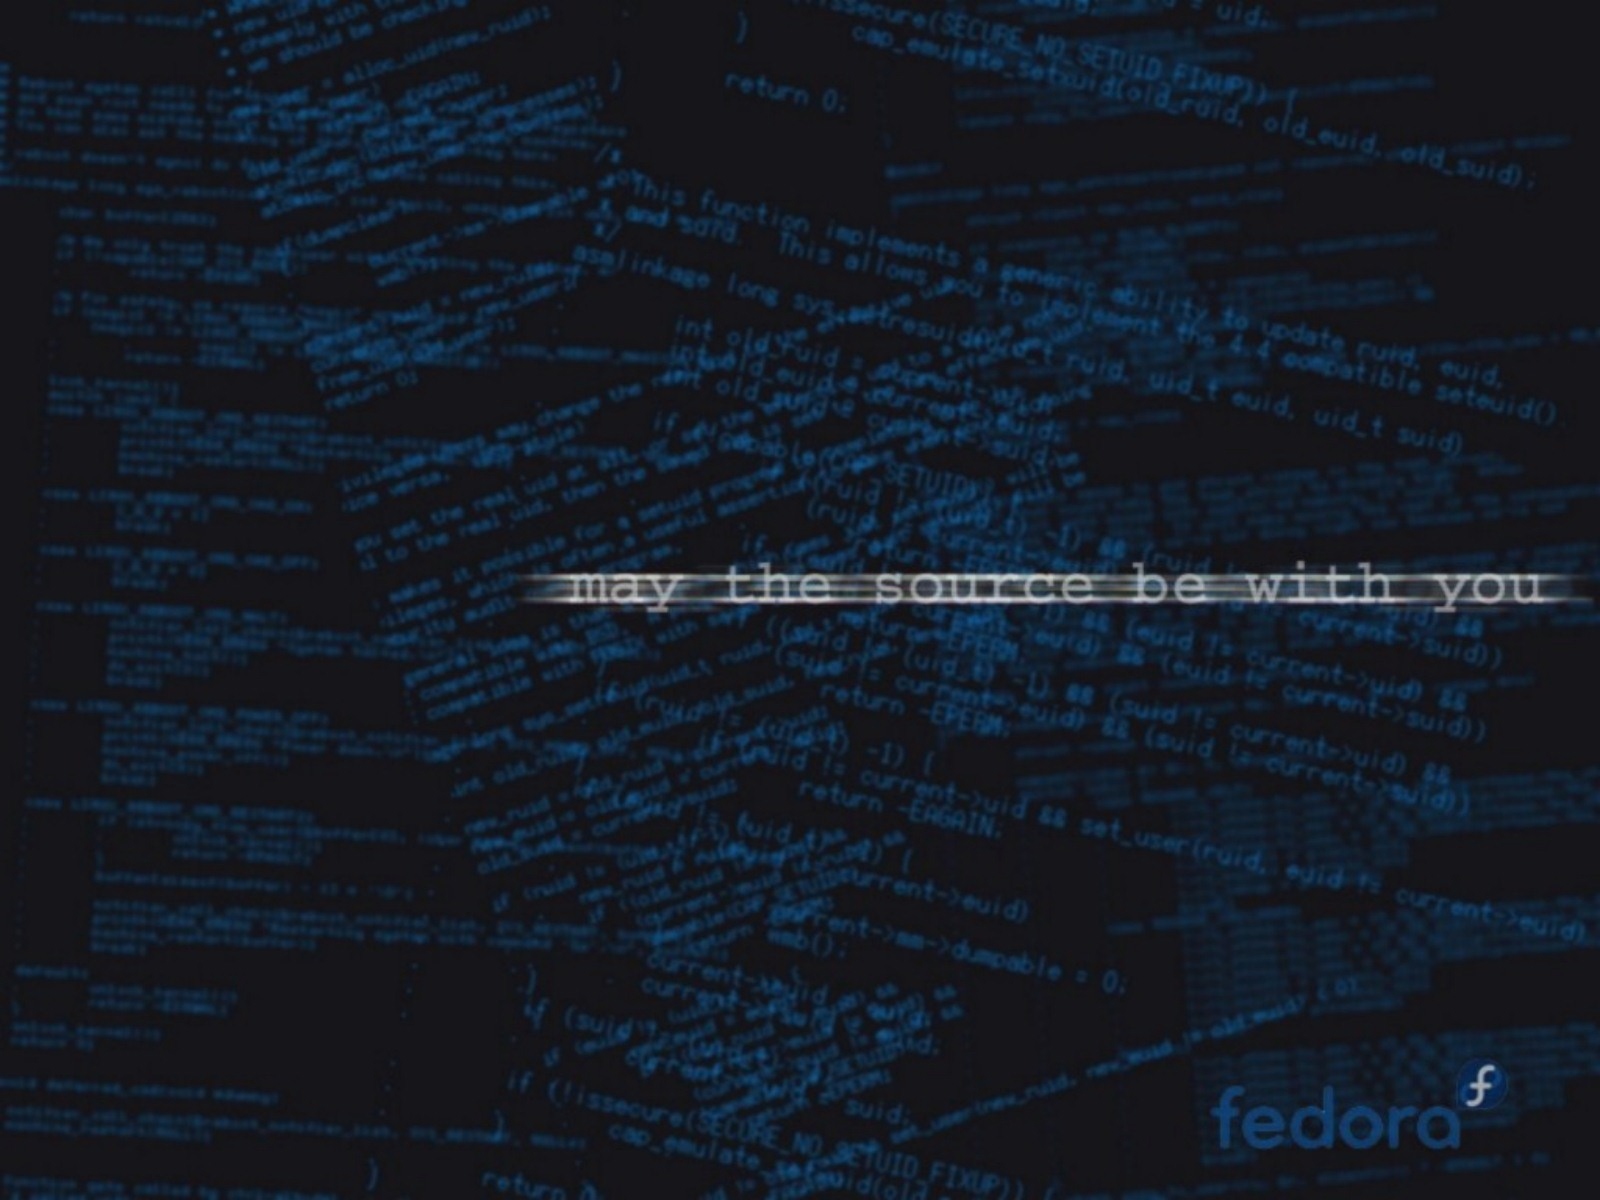 Fedora Open Source Wallpapers May The Source Be With You